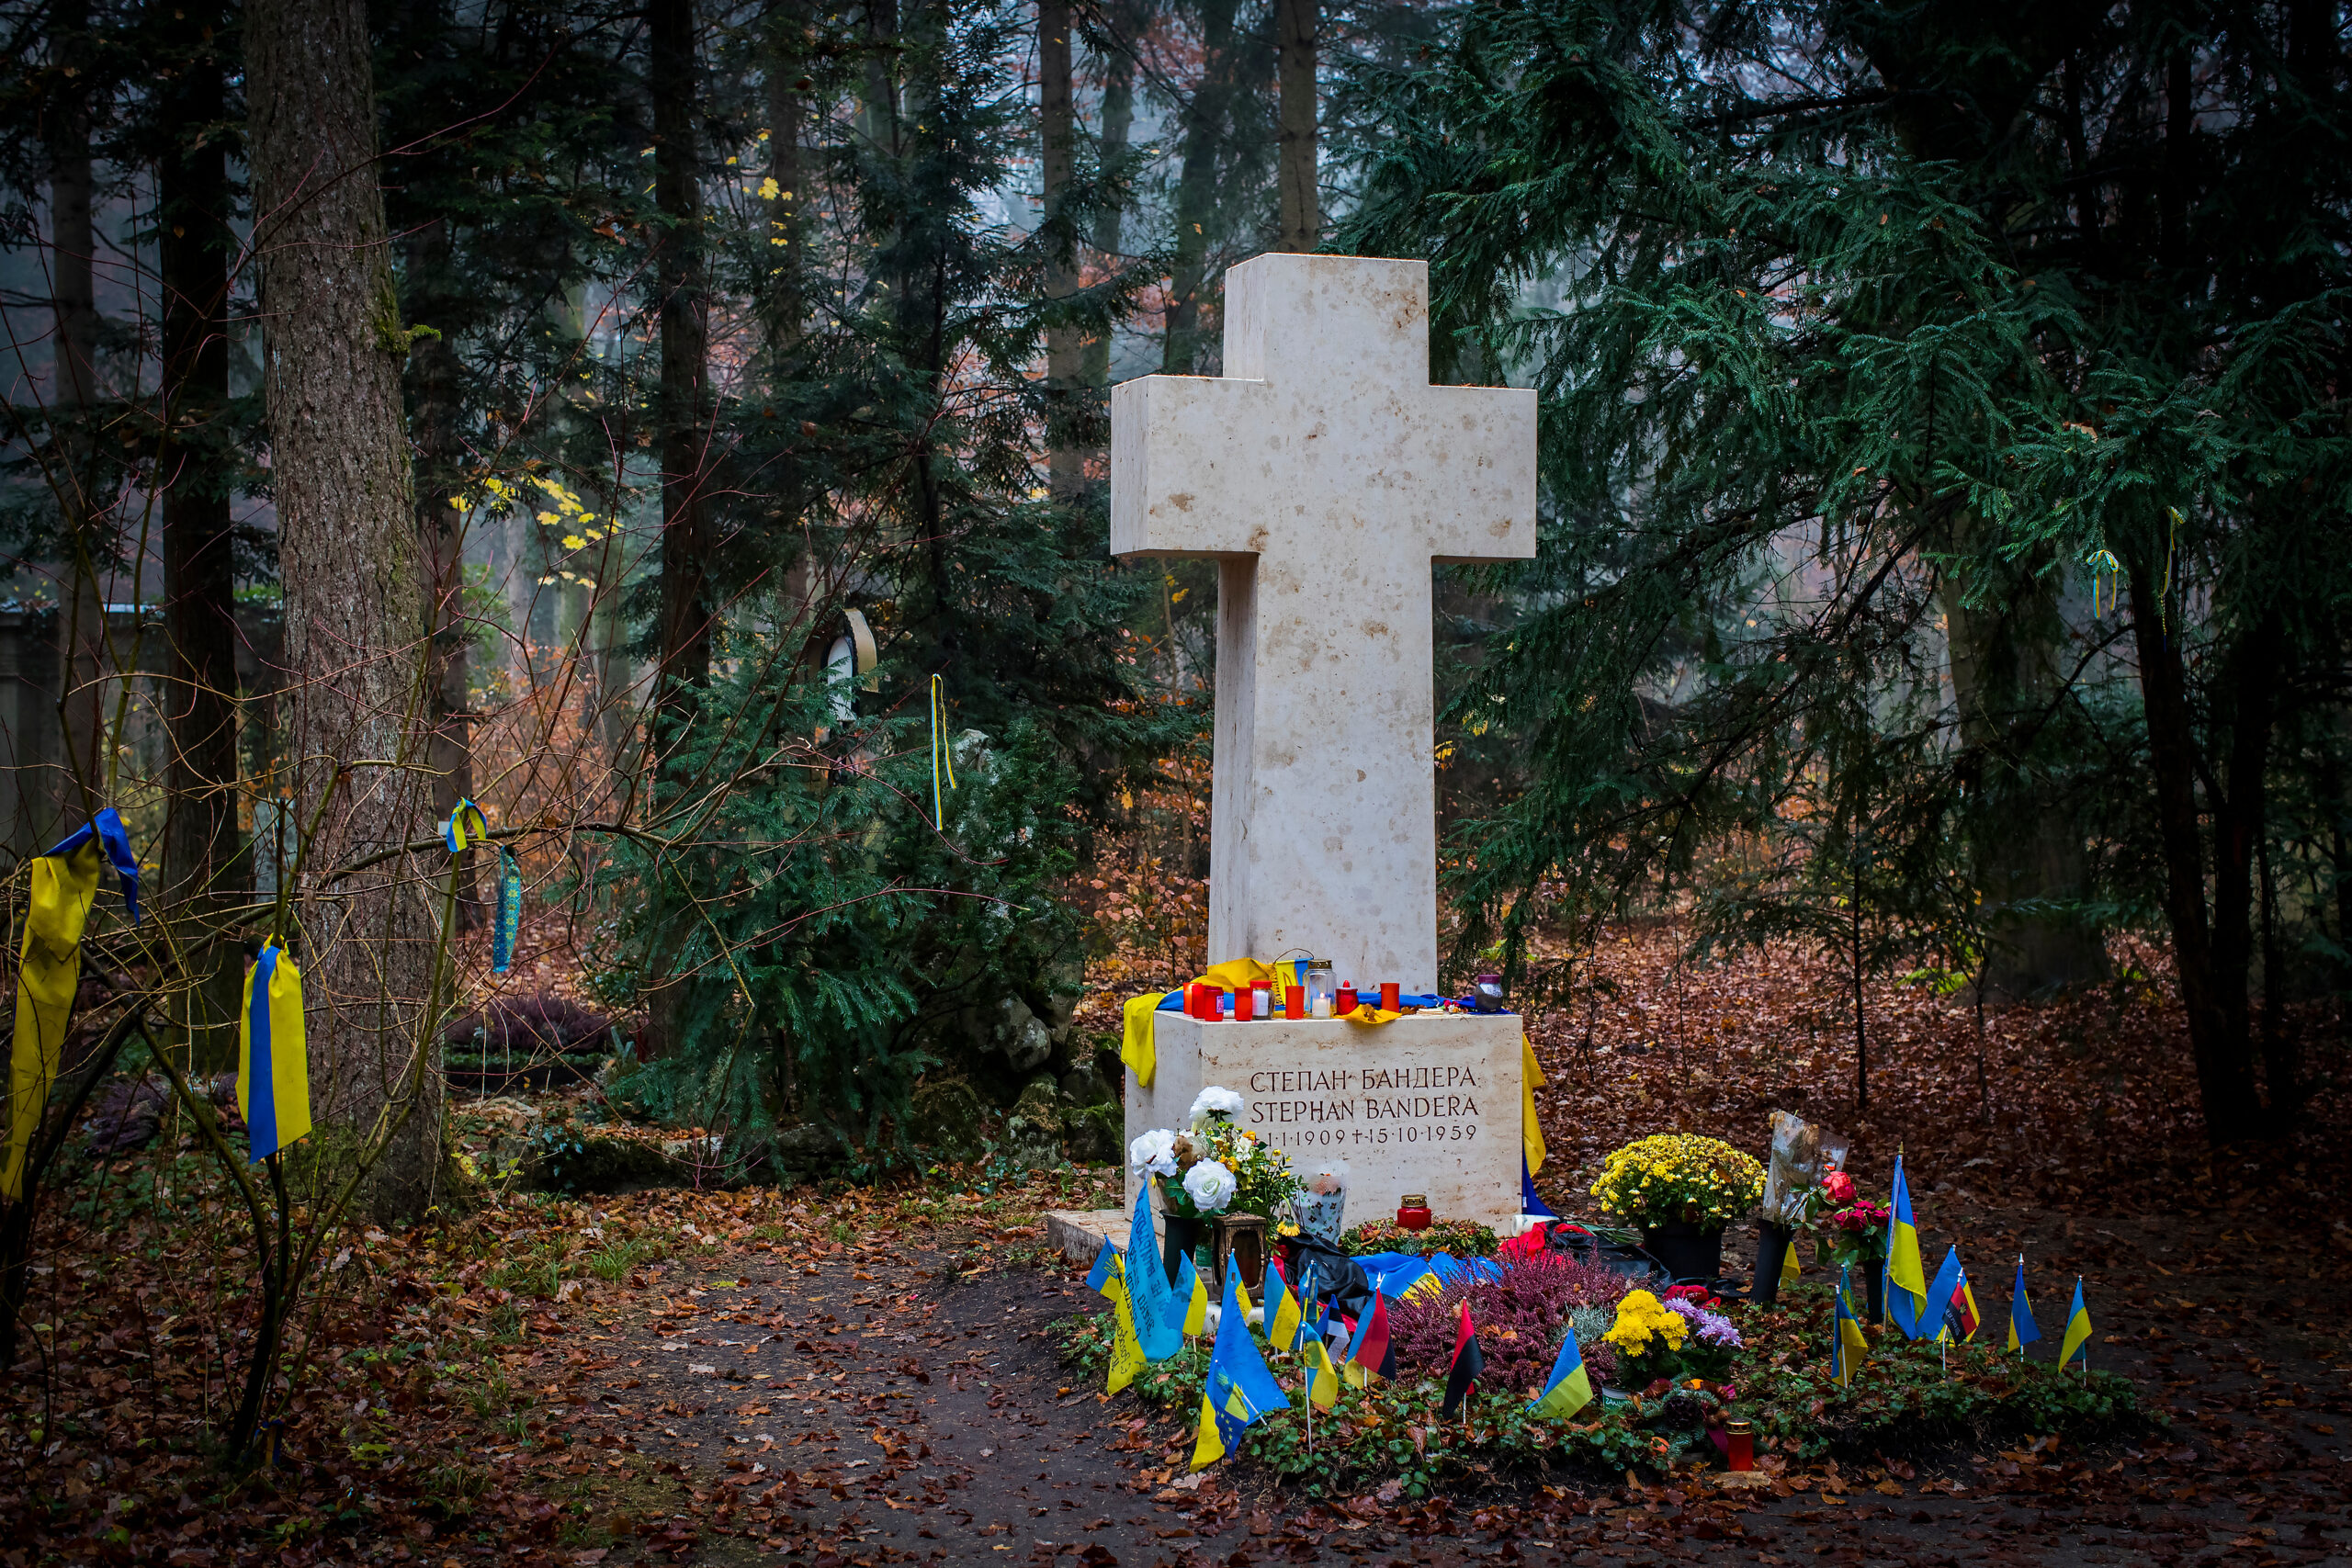 Russian disinformation in action: Bandera’s grave vandalized with provocative writing